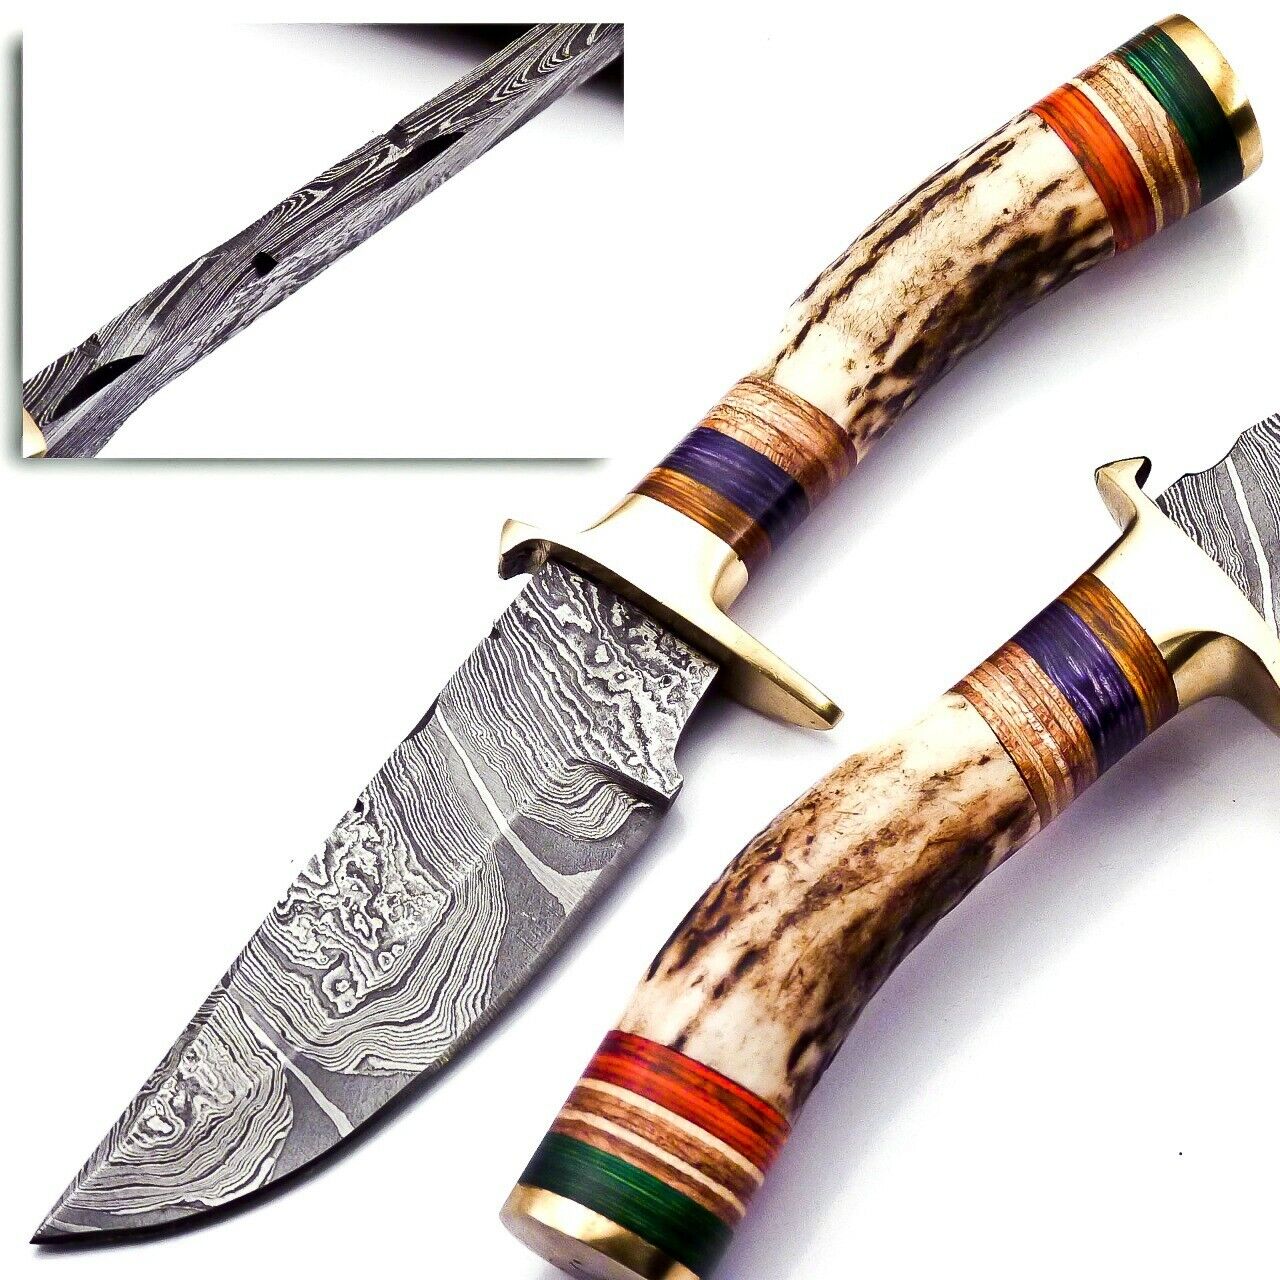 CUSTOM HAND FORGED DAMASCUS STEEL HUNTING KNIFE W/ Stag Handle Brass Guard